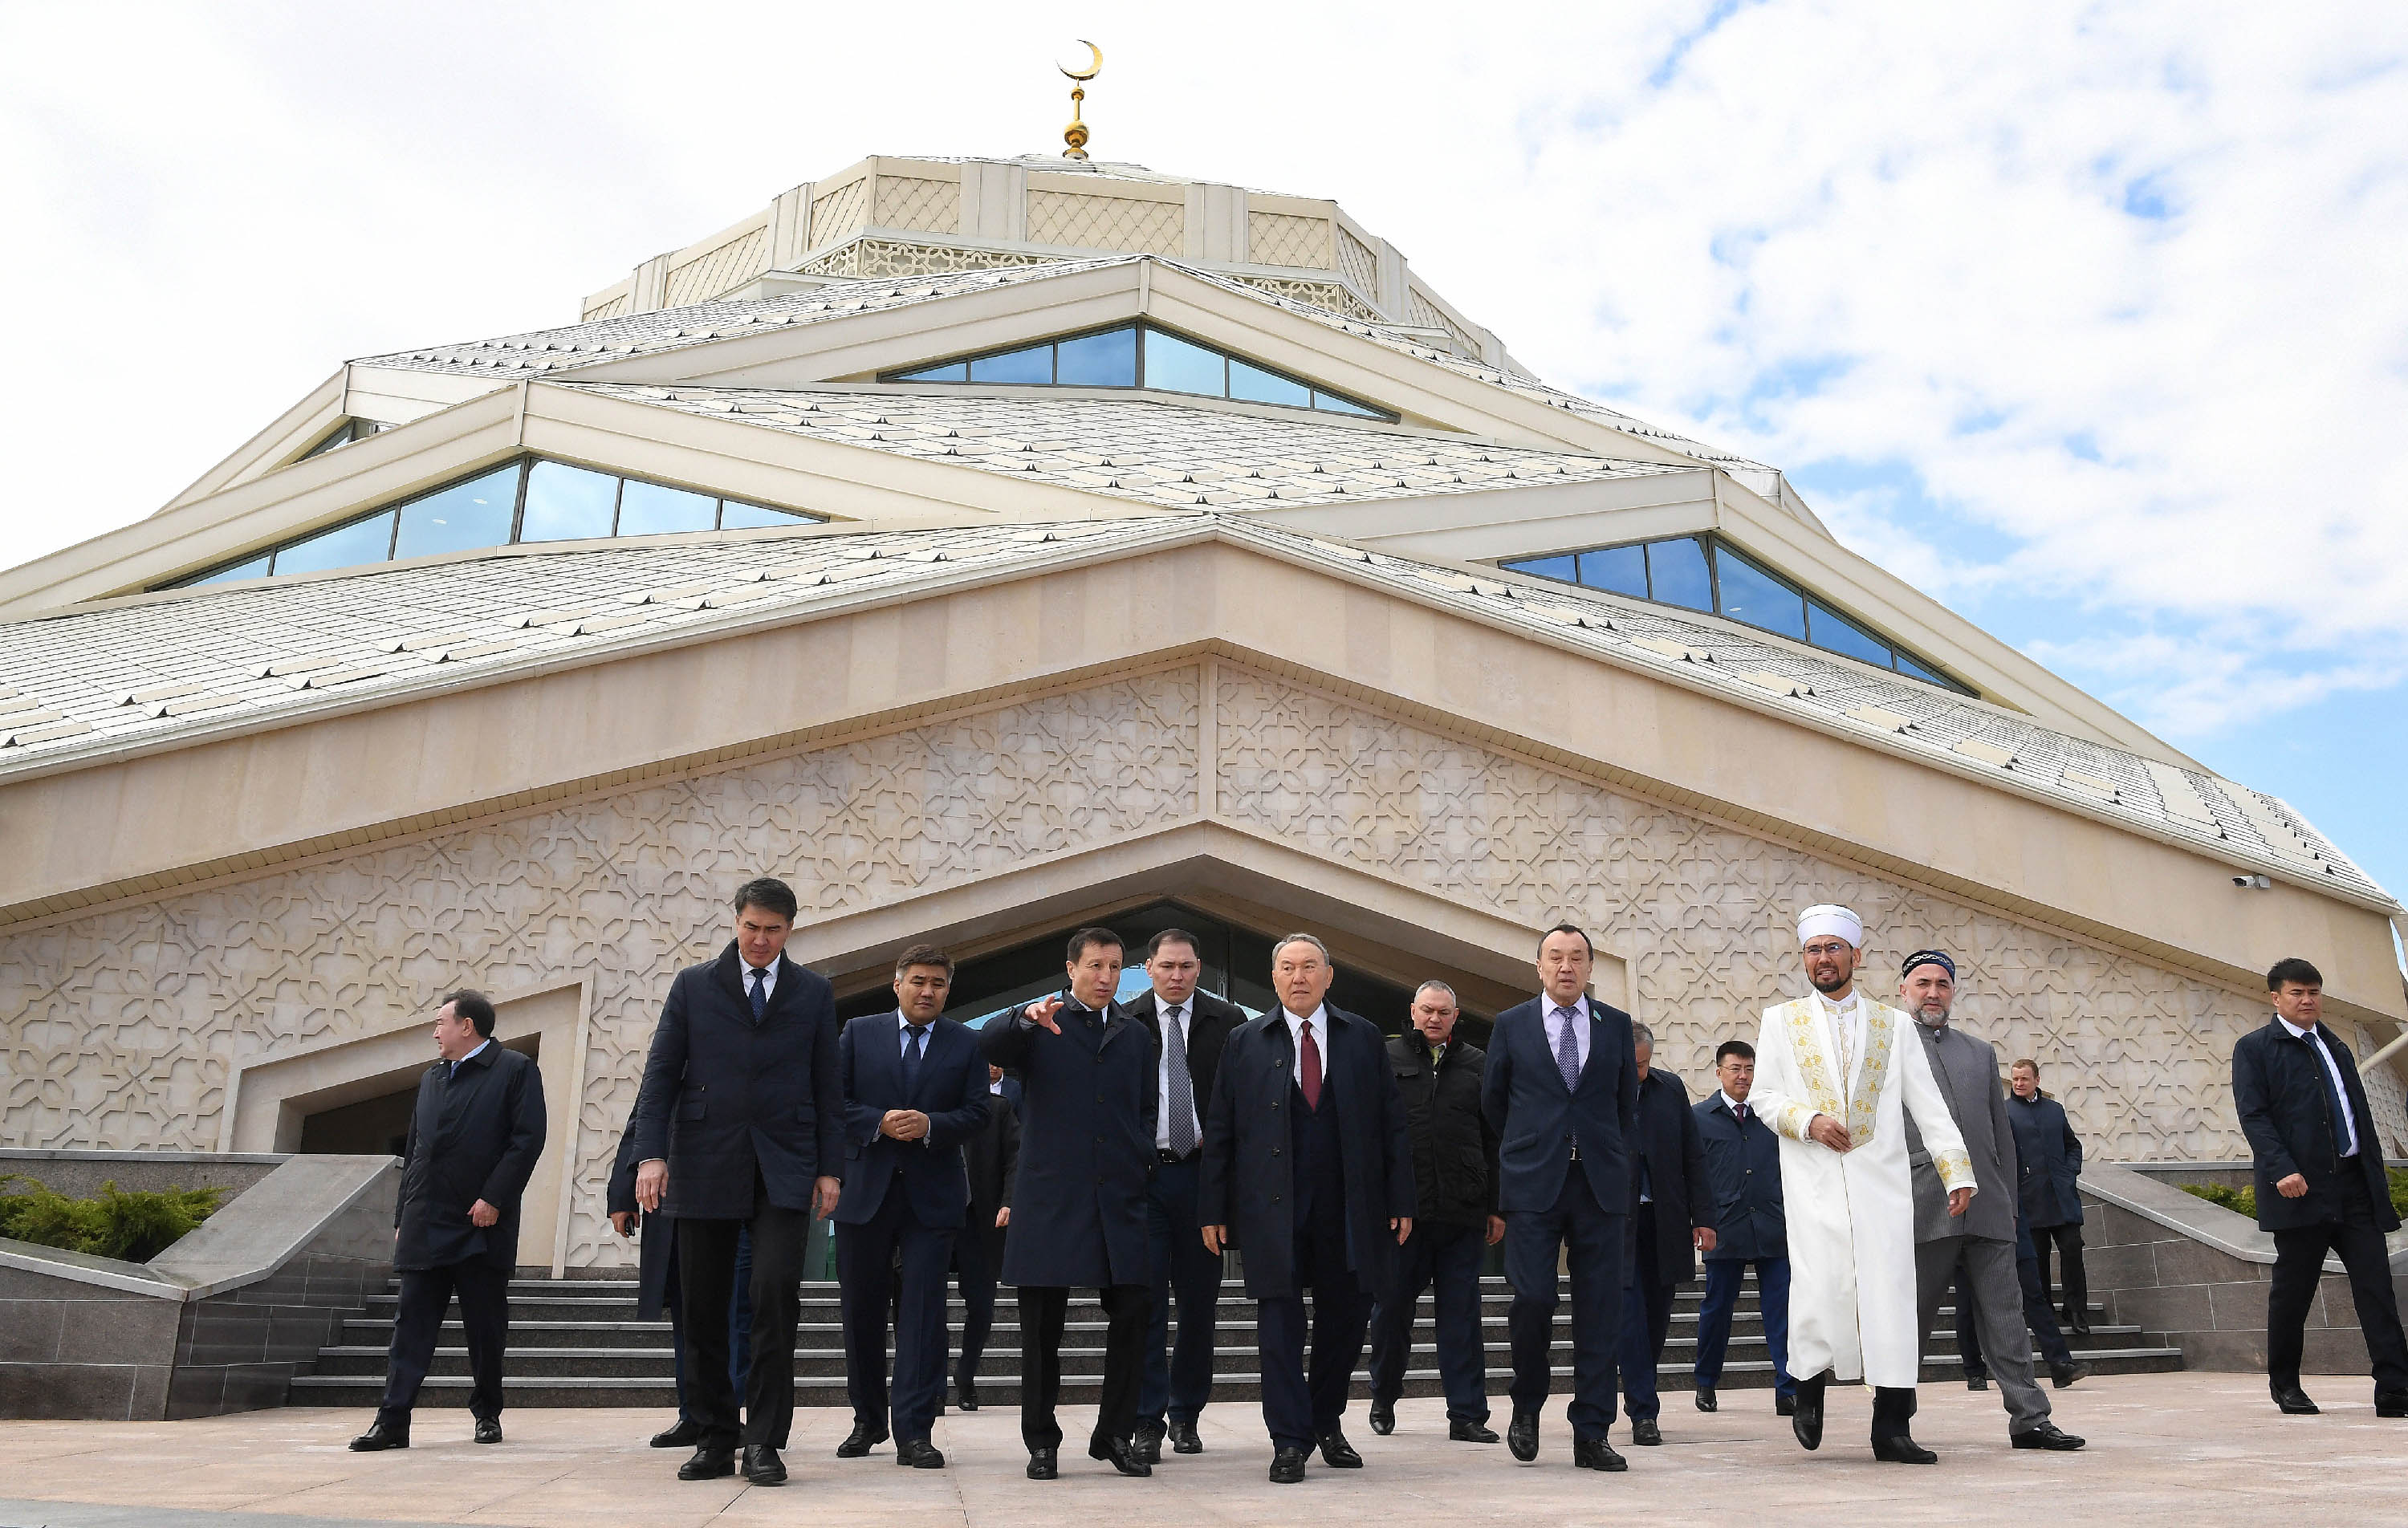 Kazakh President visits new mosque in Astana